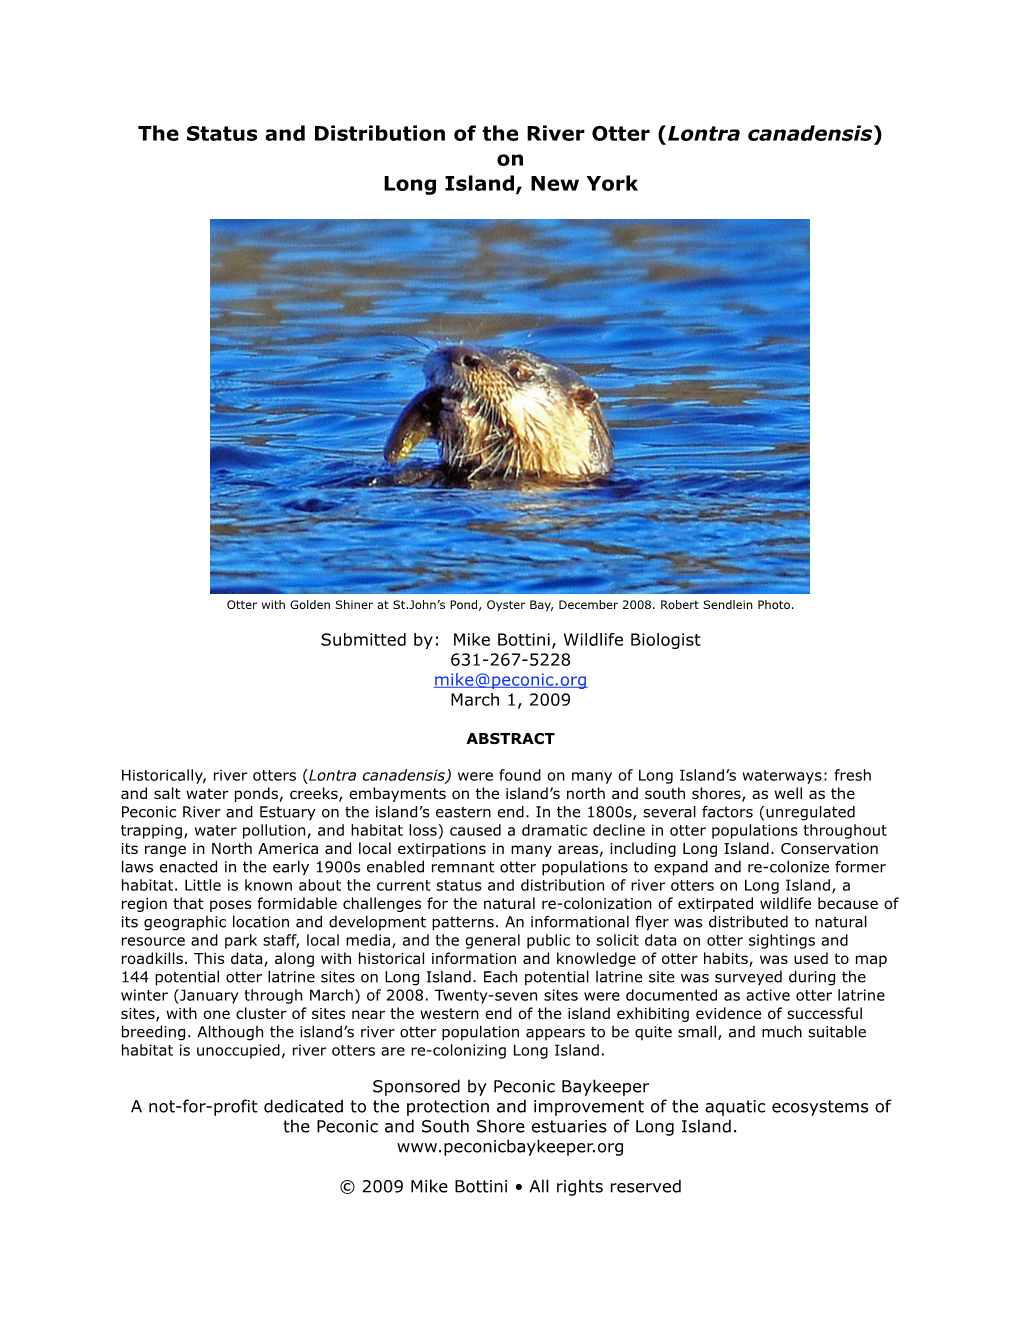 The Status and Distribution of the River Otter (Lontra Canadensis) on Long Island, New York